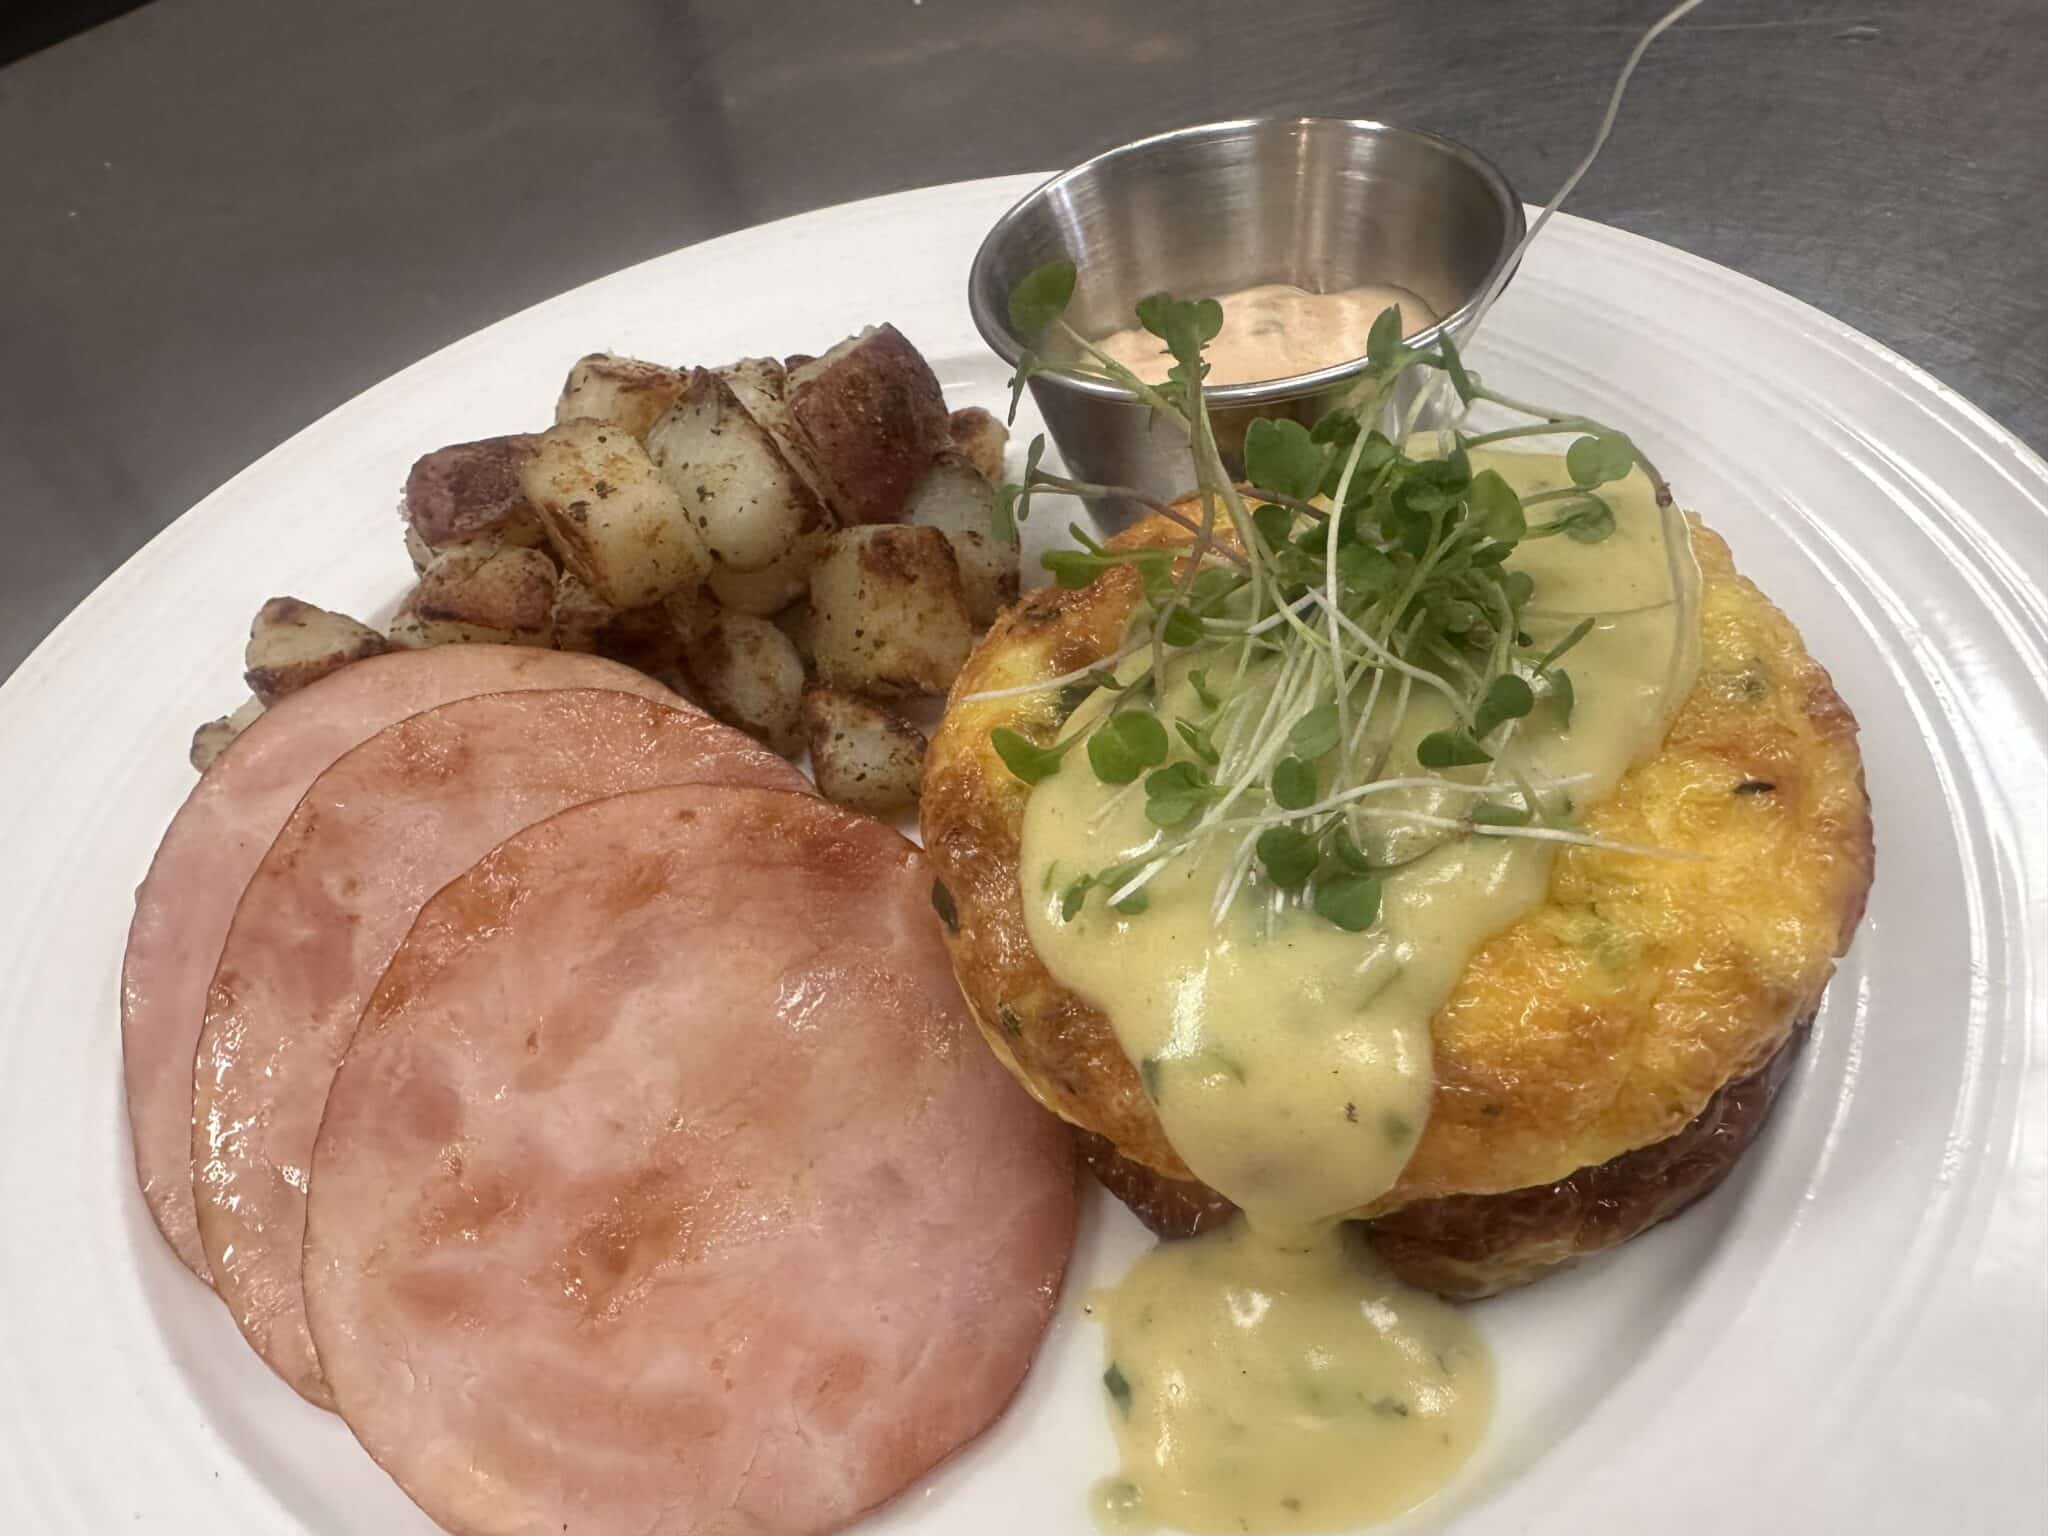 plate of royal egg and hollandaise sauce garnished with greens, slices of ham, and roasted potatoes